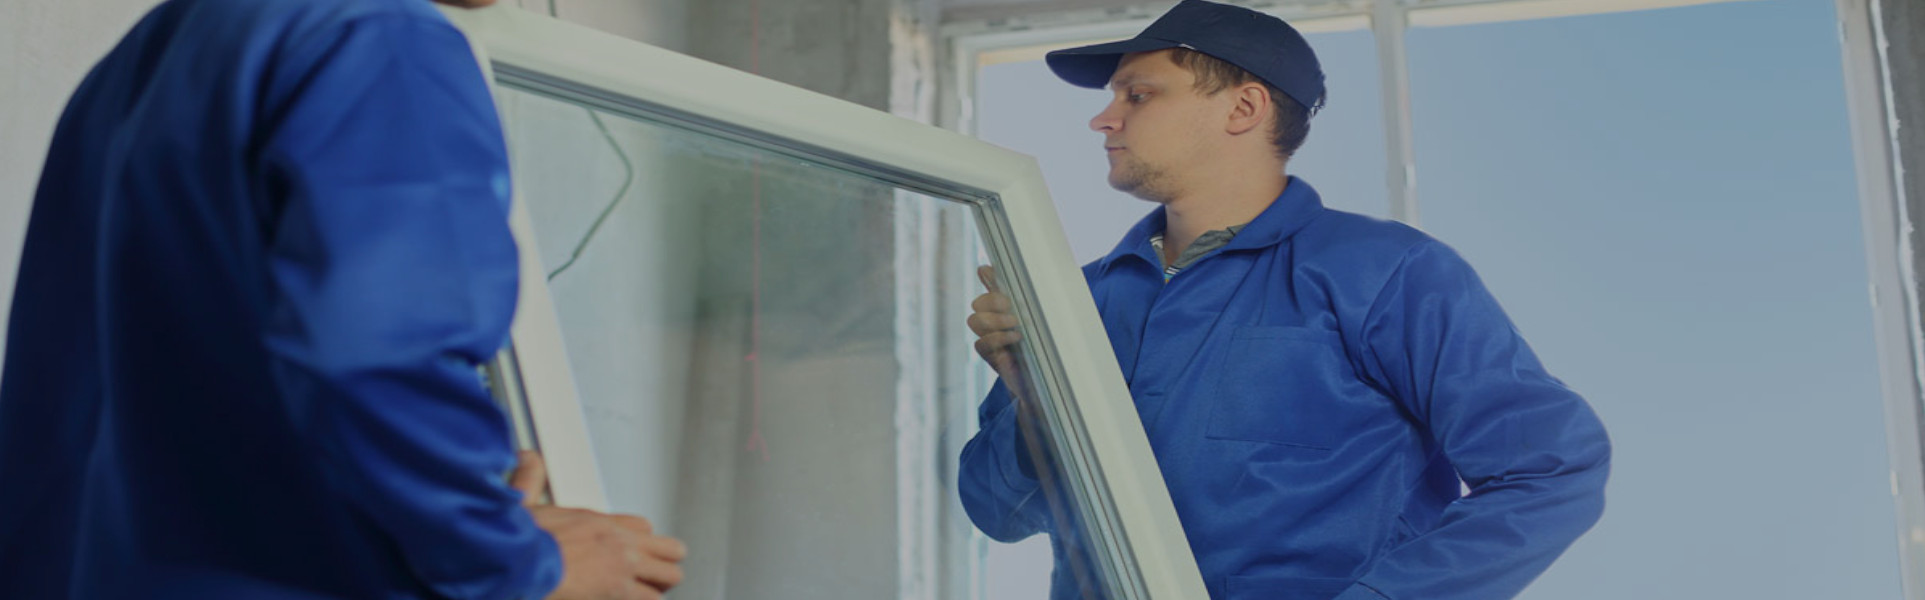 Slider, Double Glazing Installers in West Ealing, W13